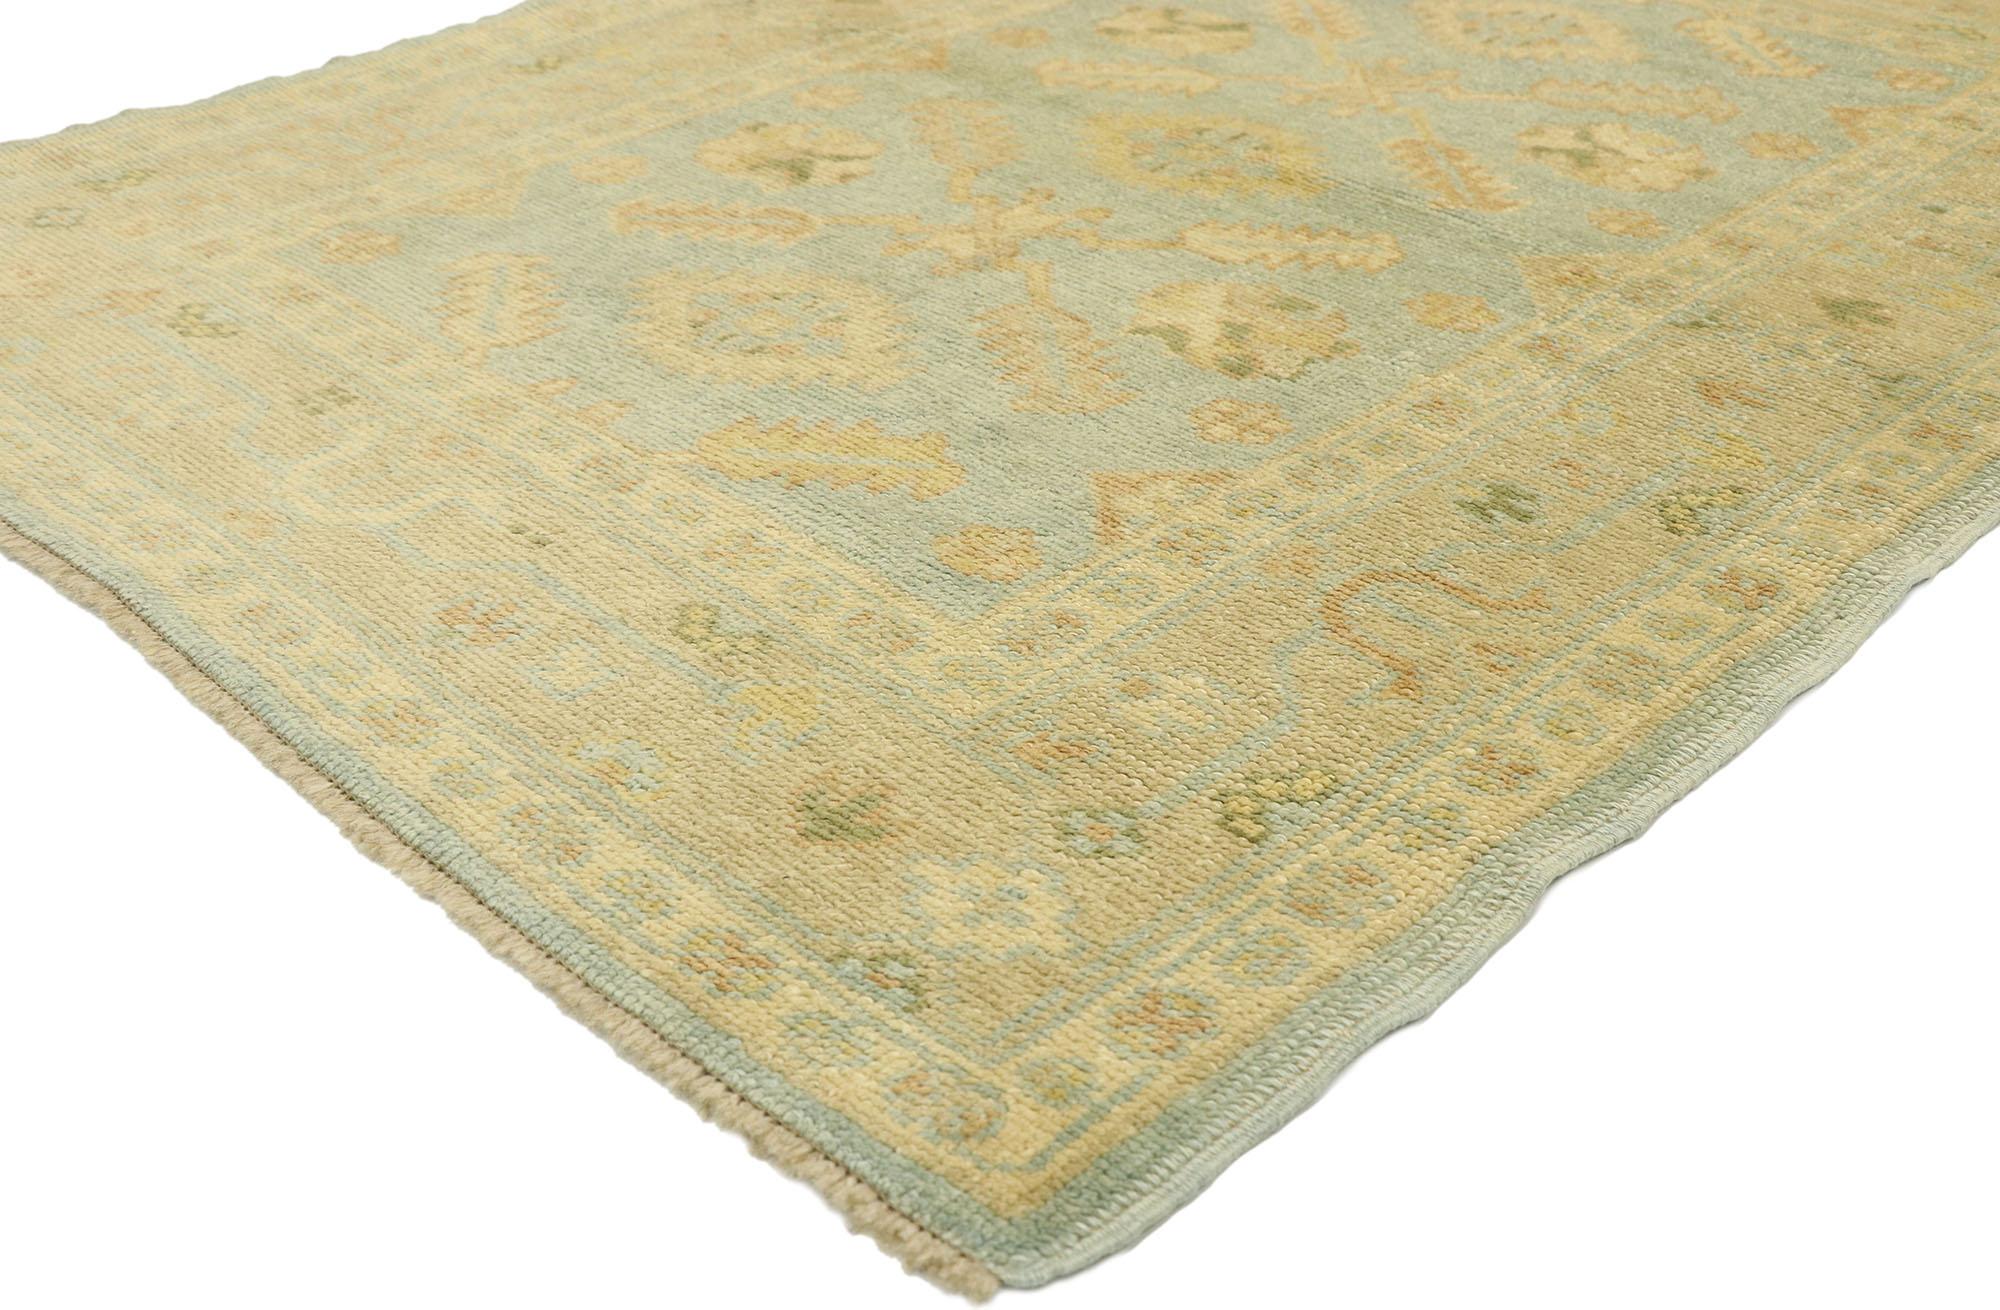 50733 New Contemporary Turkish Oushak Rug with Transitional Coastal Cottage Style. With a subtle, airy color palette and transitional cottage style, this Turkish Oushak rug keeps the eyes entertained, but it is still serene and relaxing. The Oushak